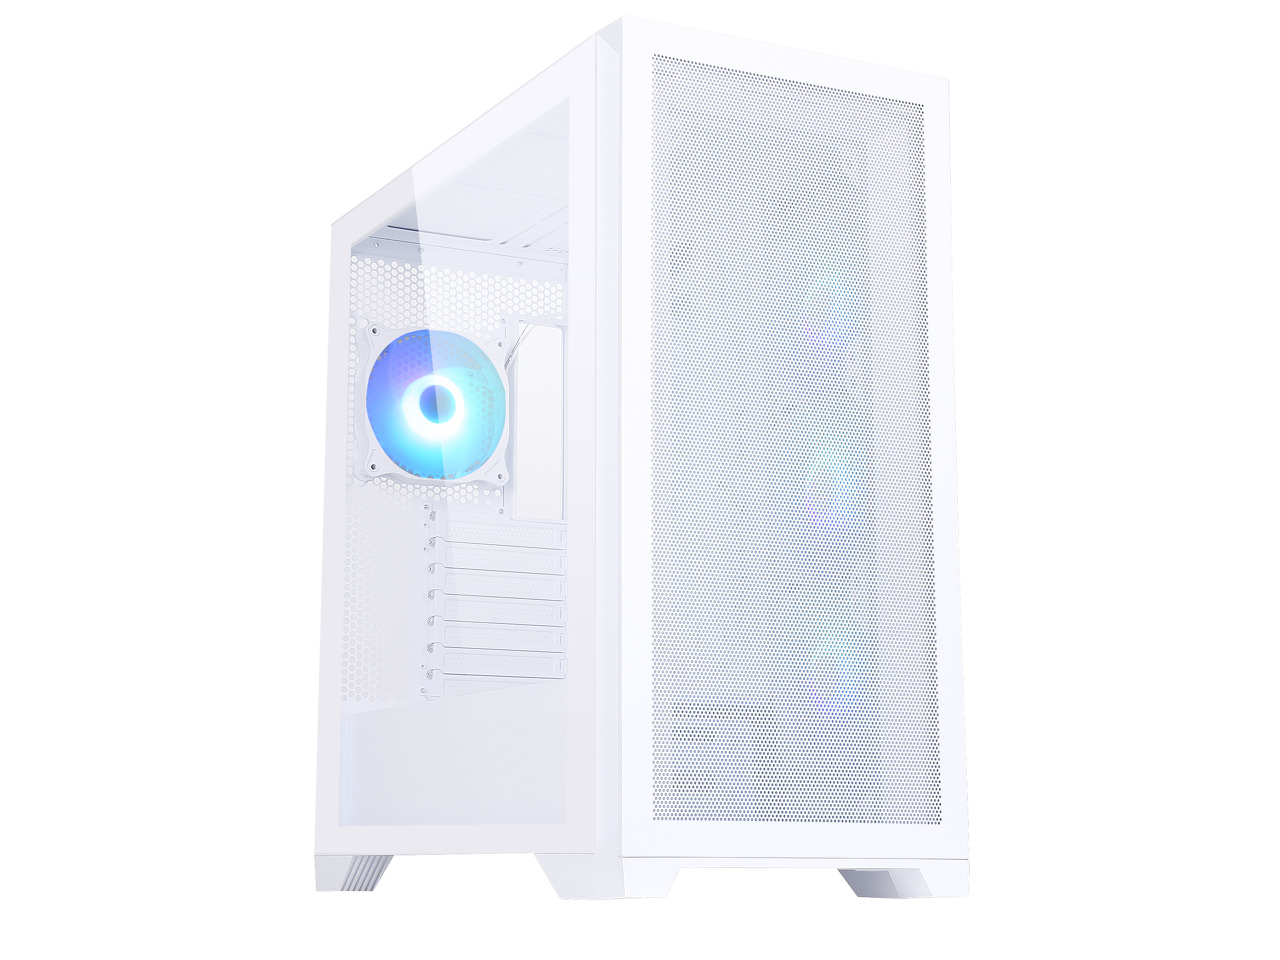 Sama 4501-White Dual USB3.0 and Type C Tempered Glass ATX Full Tower Gaming Comp